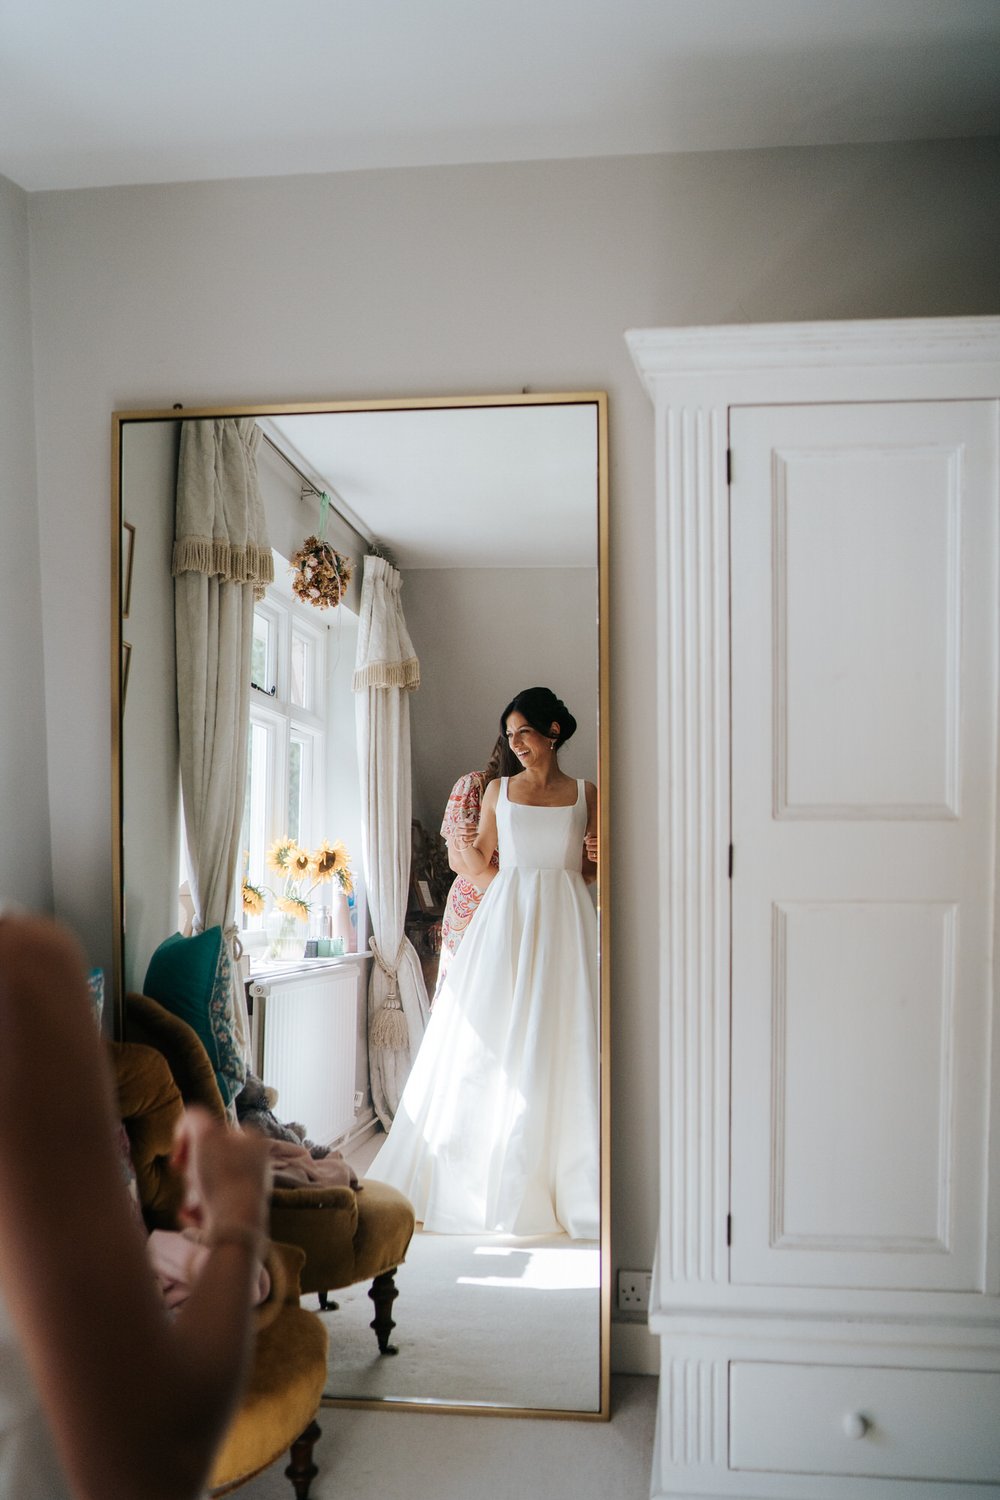 Bride, in her wedding dress, looks at herself in the mirror